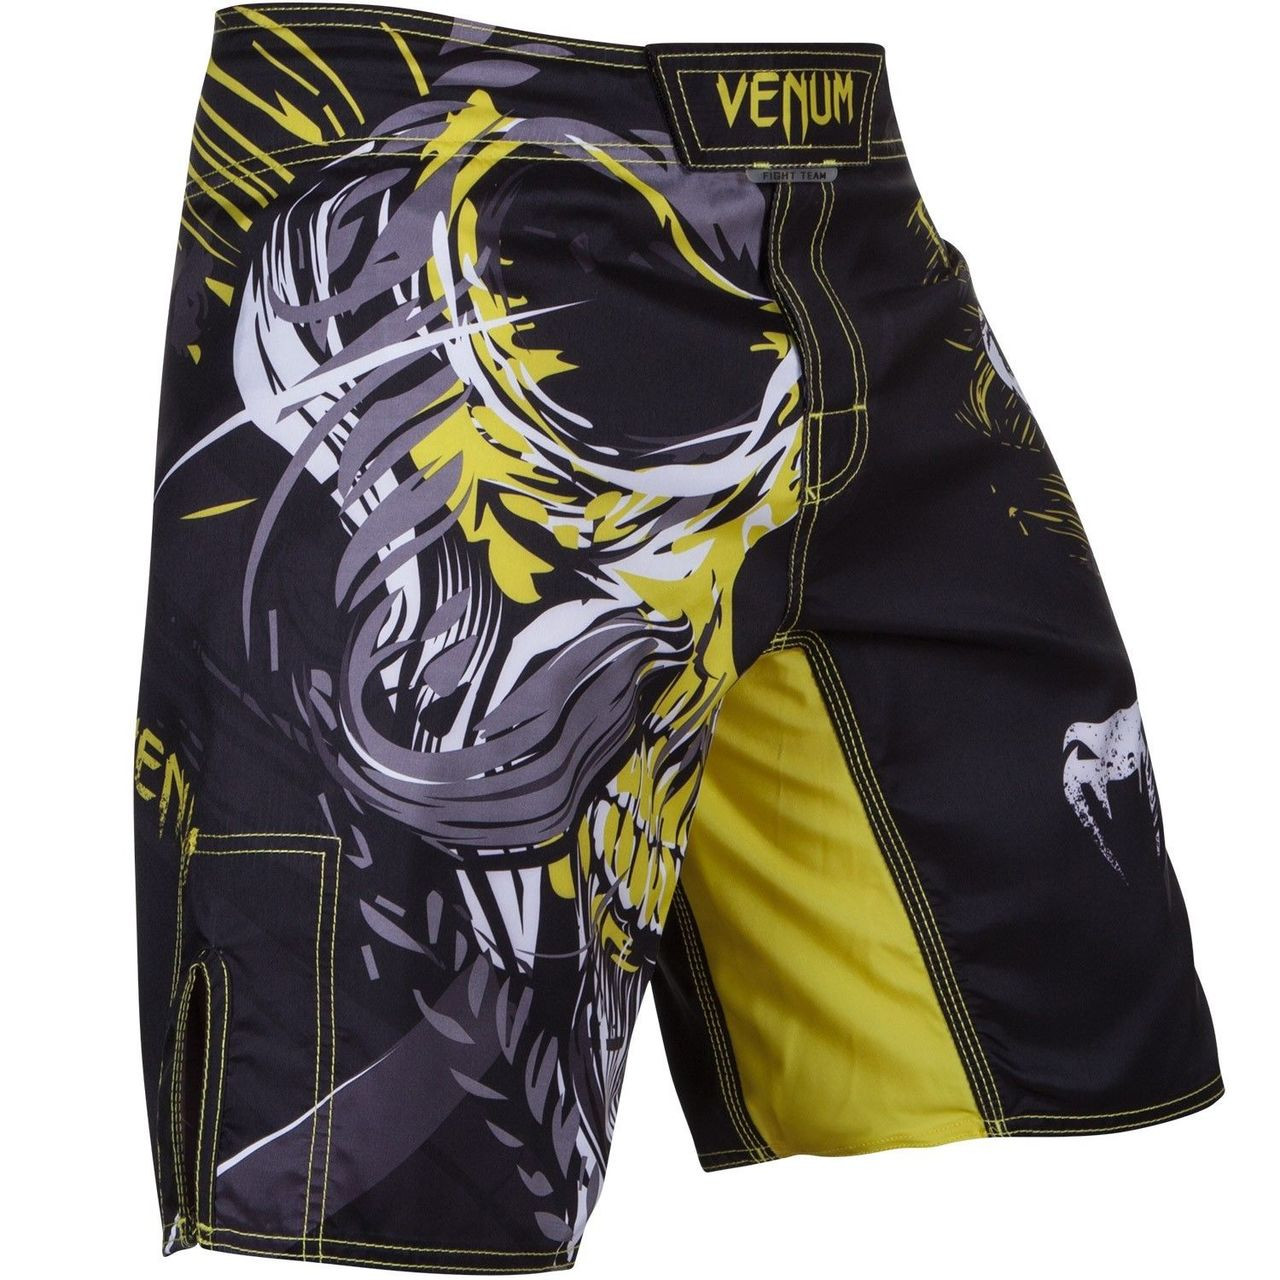 Venum Viking Fight Shorts now available at www.thejiujitsushop.com 

Enjoy Free Shiping from The Jiu Jitsu Shop today on all your Venum Fight Co Gear